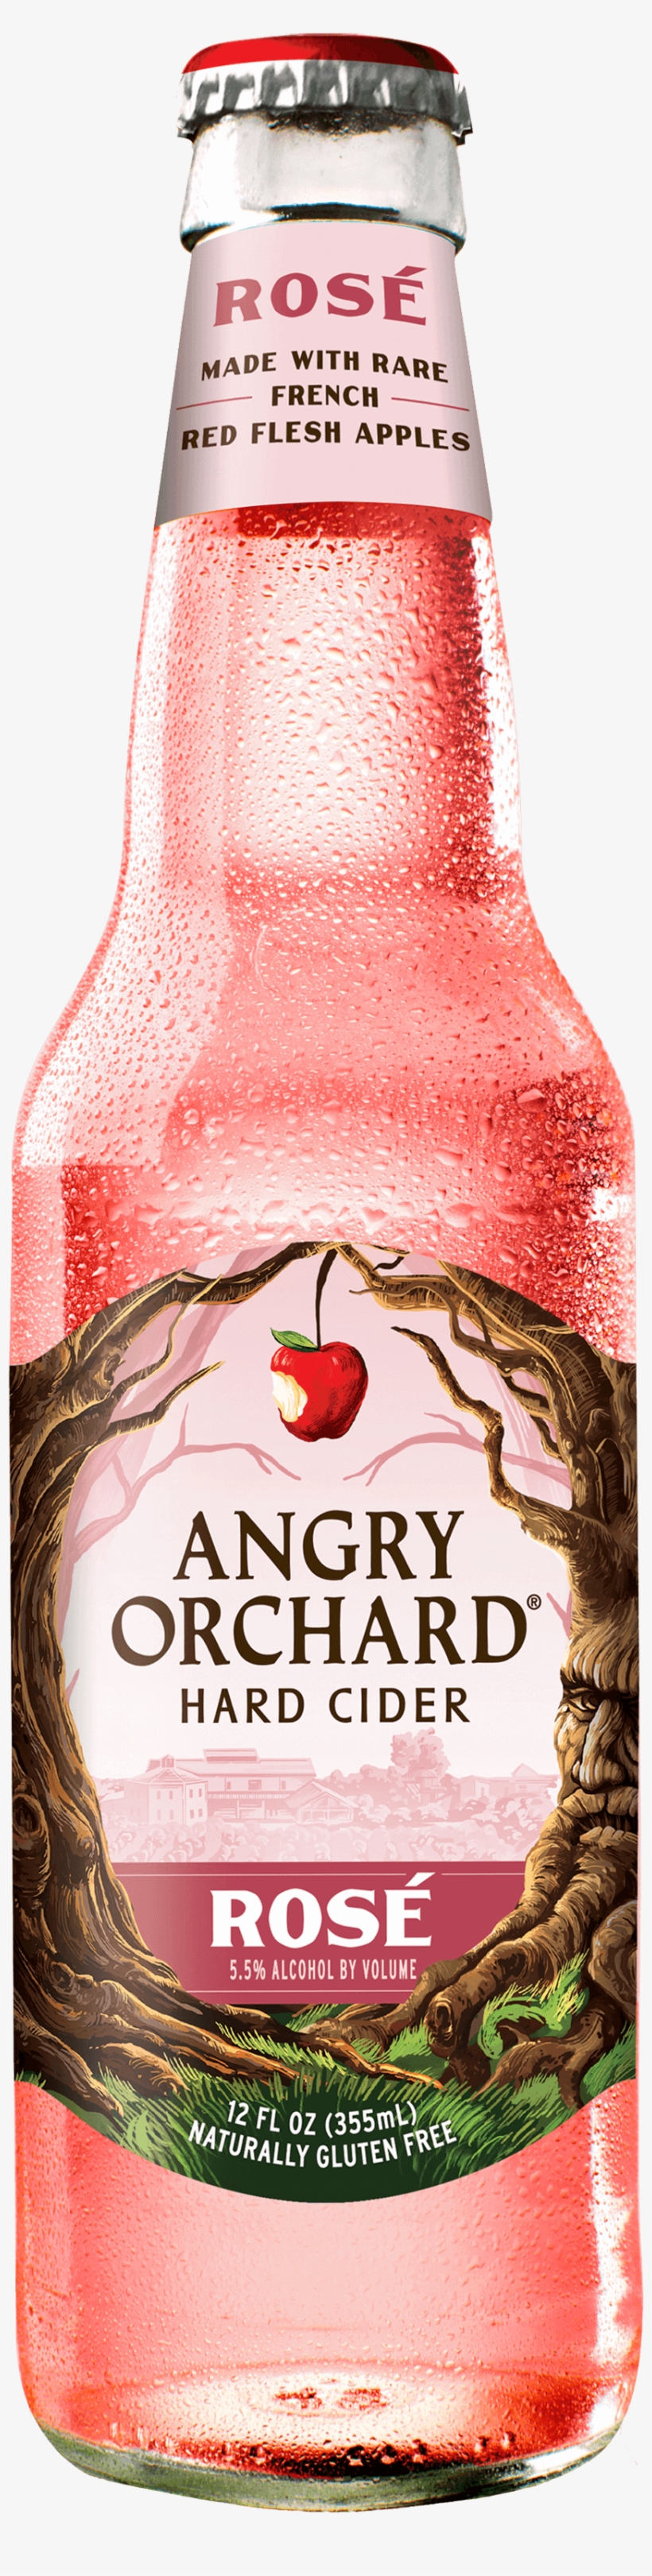 Angry Orchard Rose - Angry Orchard Rose Review, transparent png #3173712